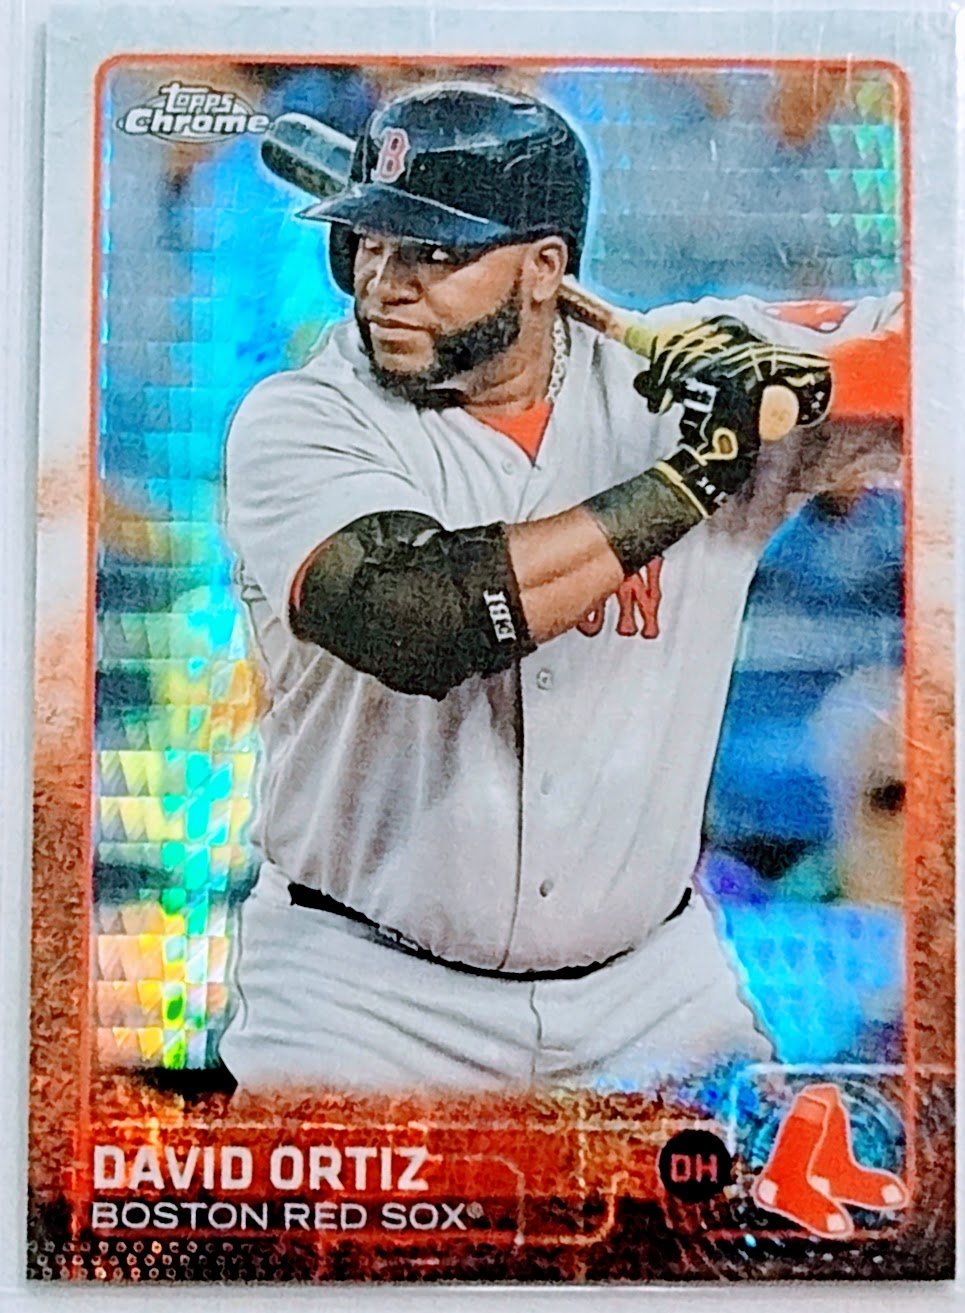 2015 Topps Chrome David Ortiz Prism Refractor Baseball Card TPTV simple Xclusive Collectibles   